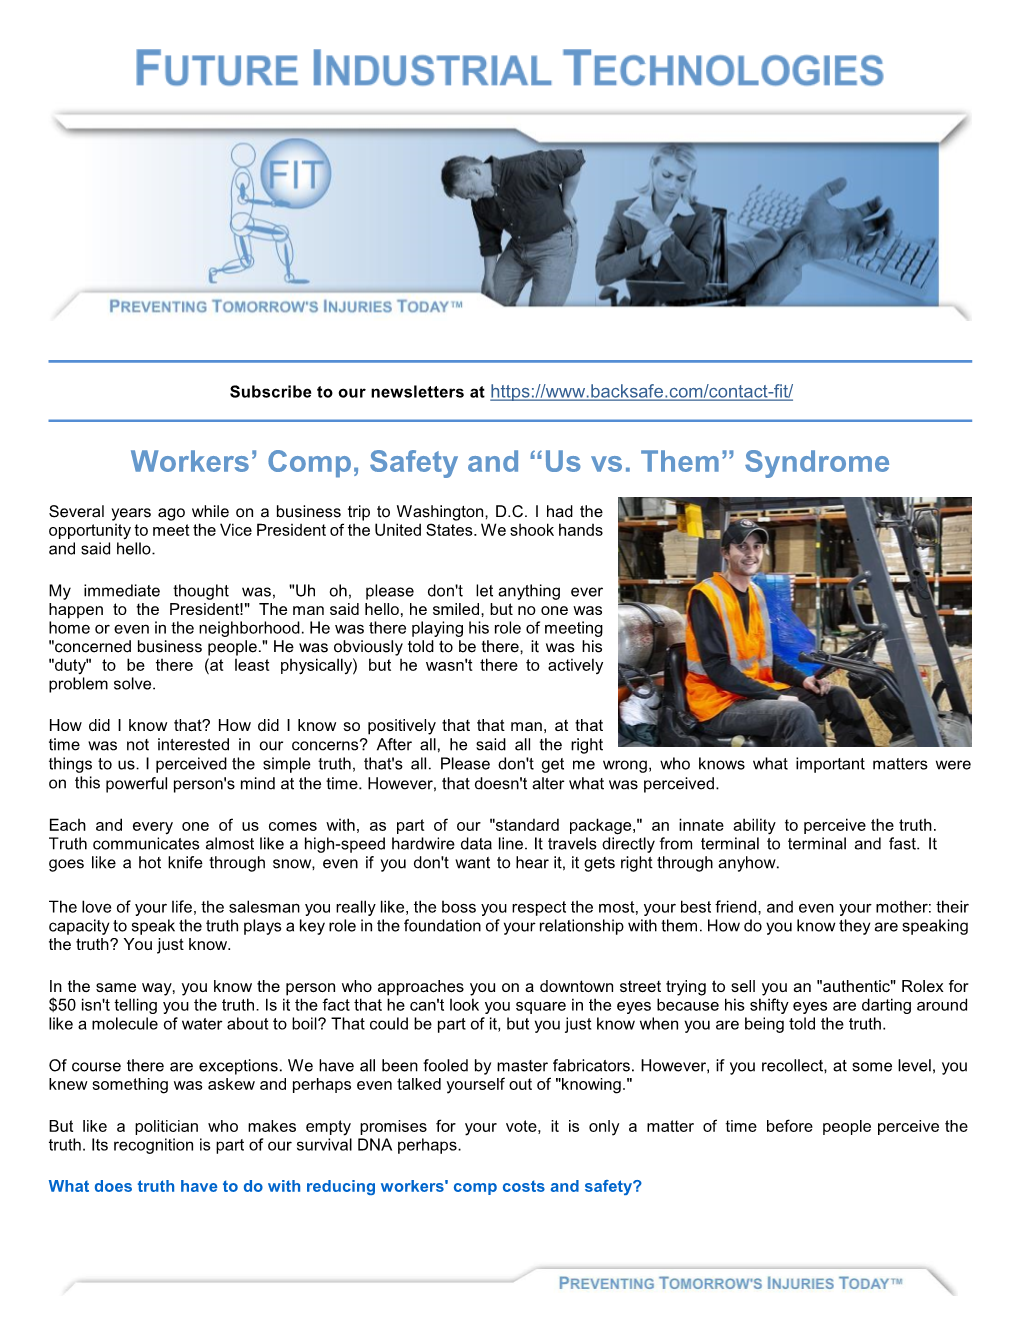 Workers' Comp, Safety and “Us Vs. Them”